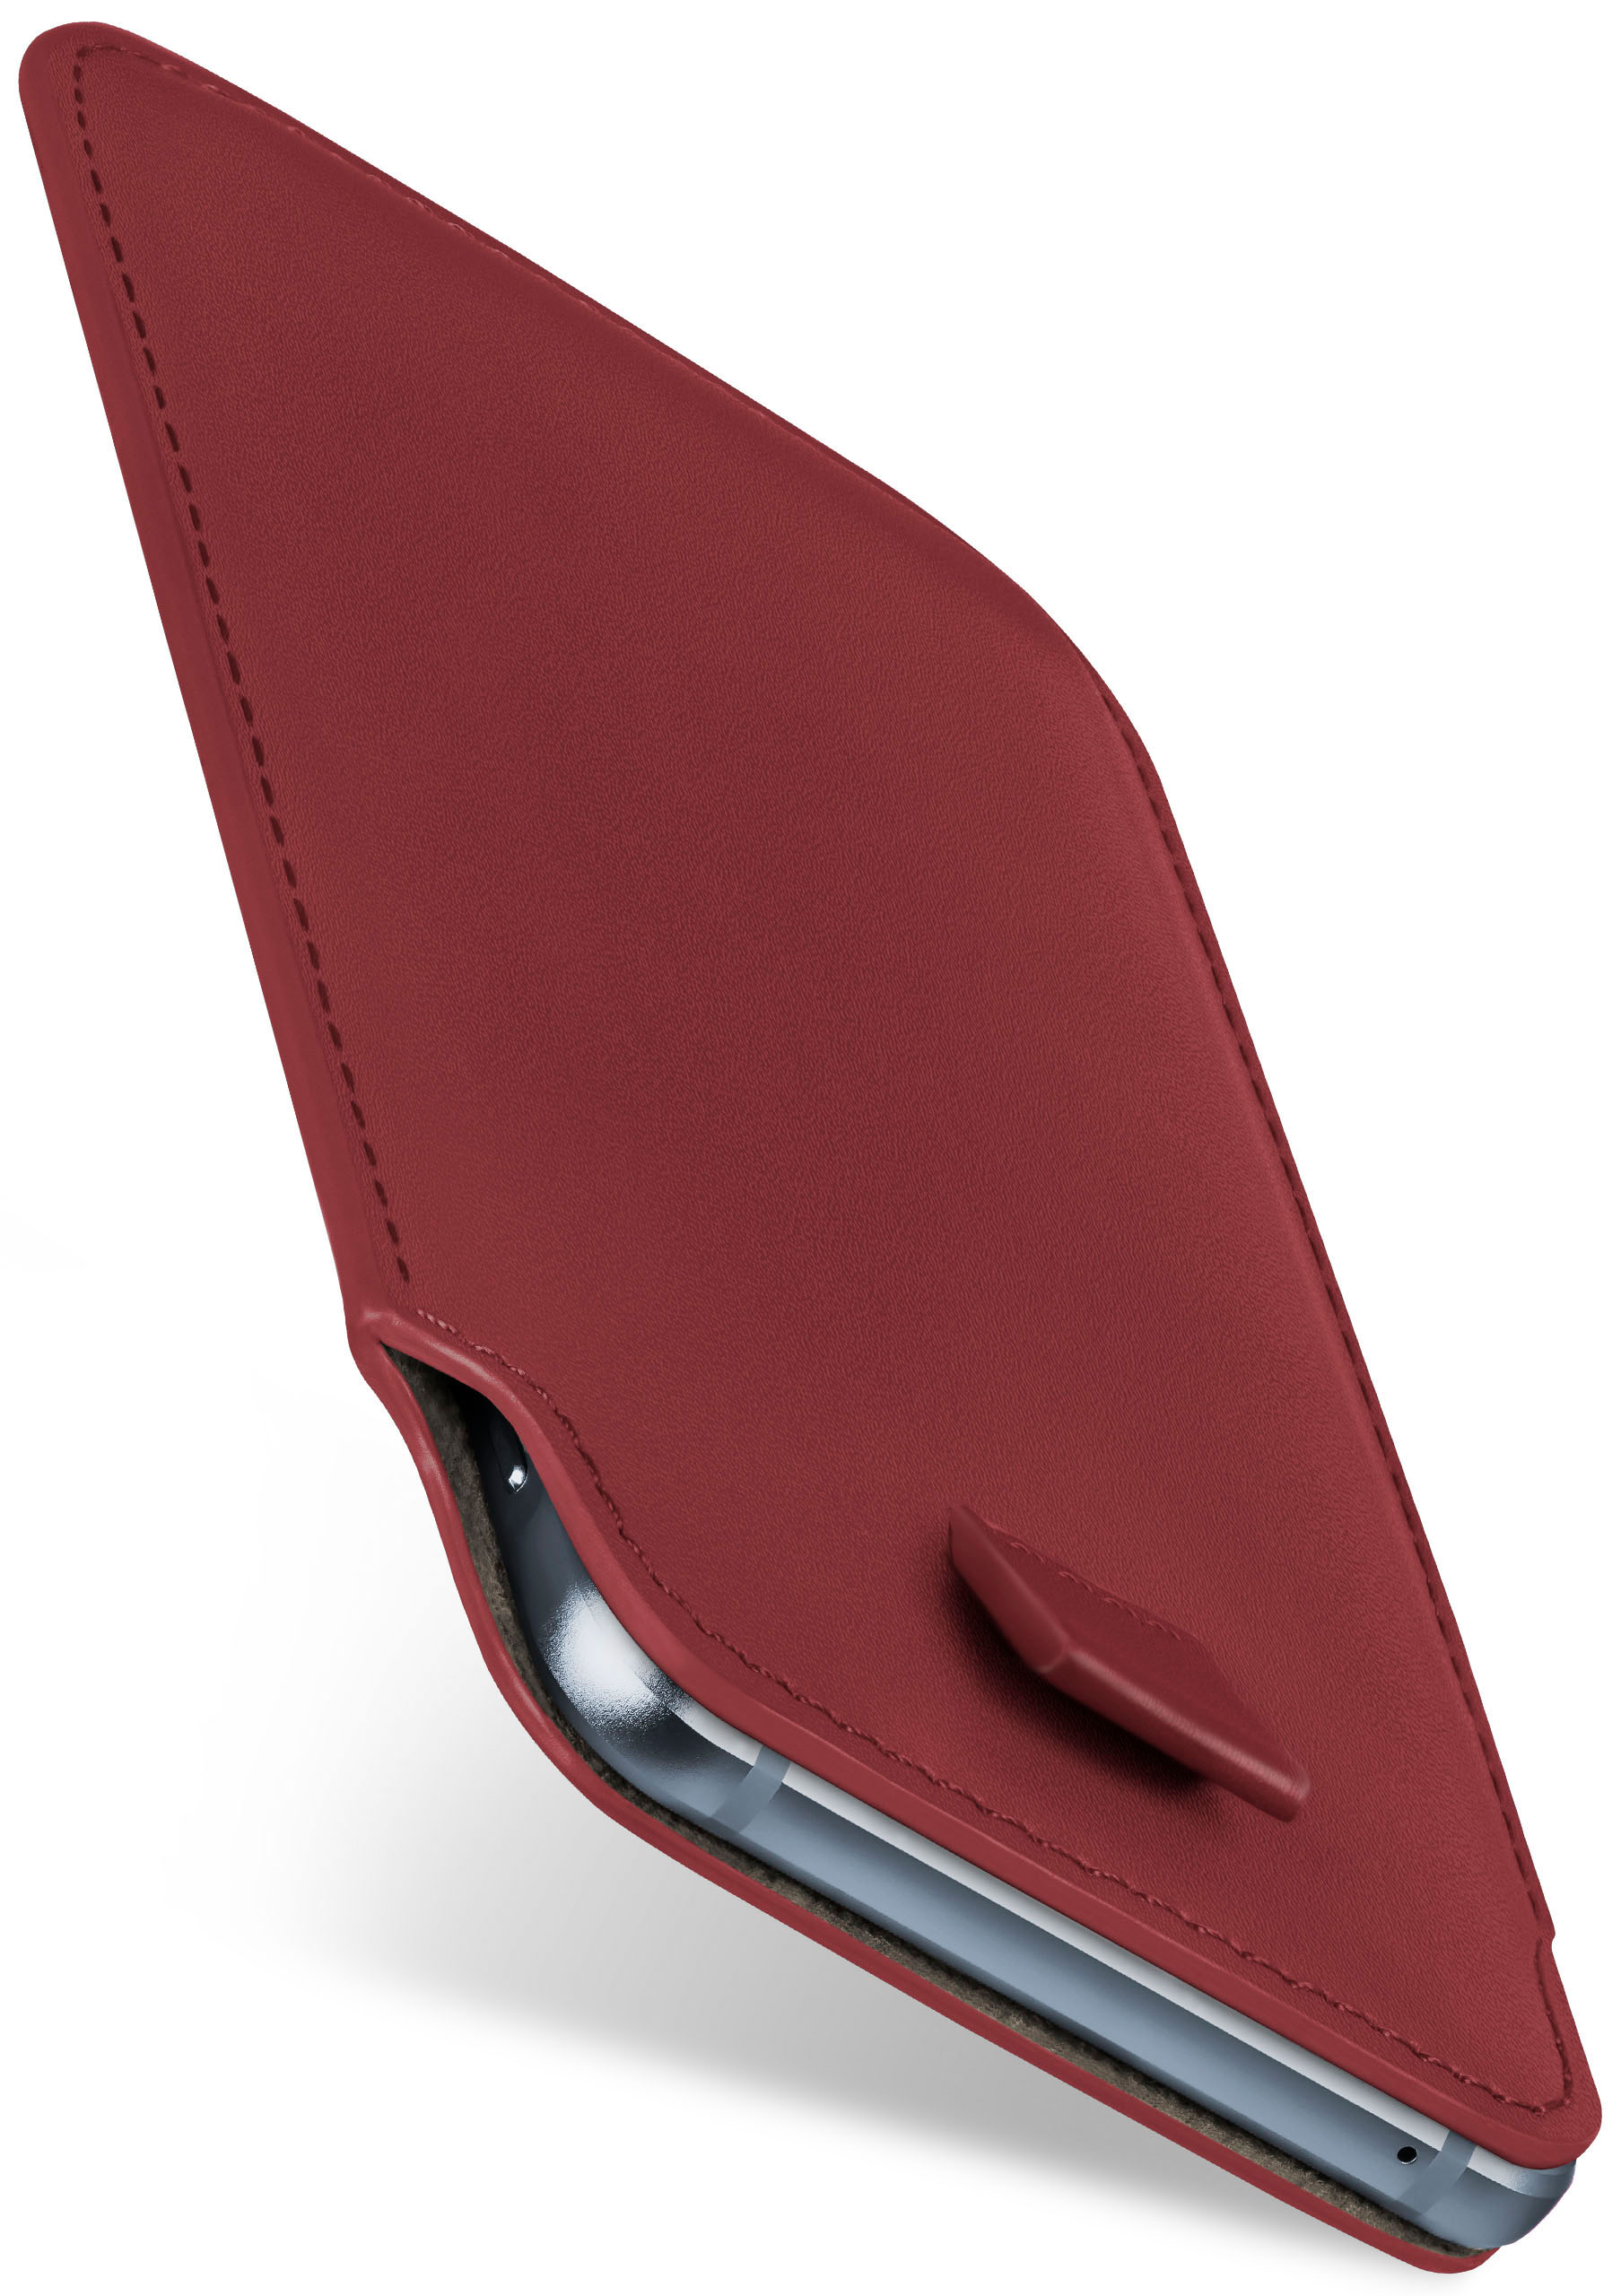 Cover, Slide XS Case, iPhone Apple, Full Max, MOEX Maroon-Red